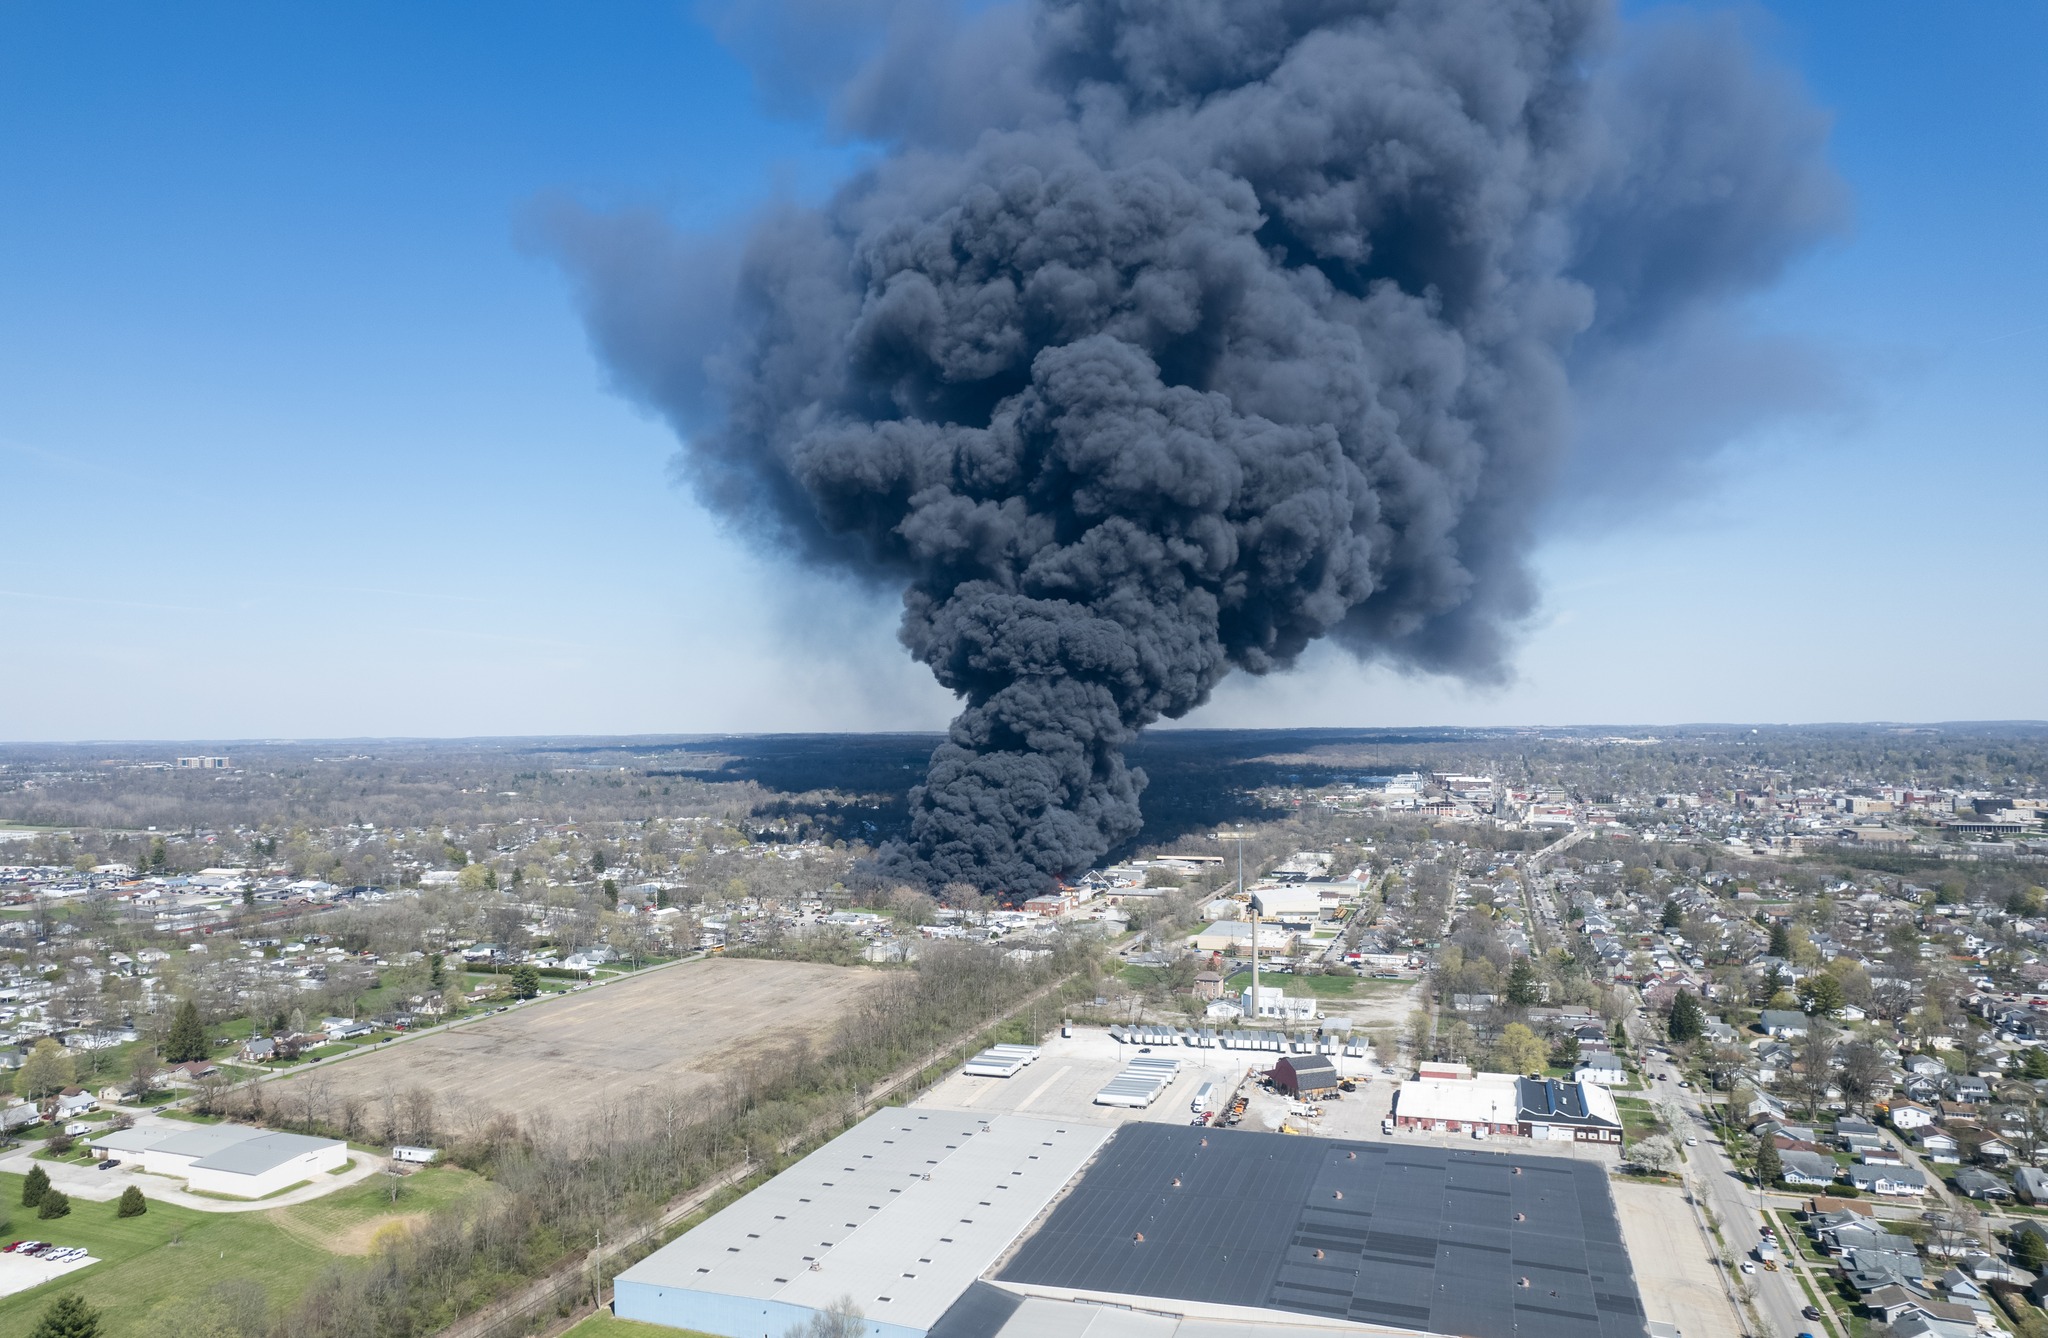 Richmond recycling company sues city, says it was aware of 'building hazards' before fire